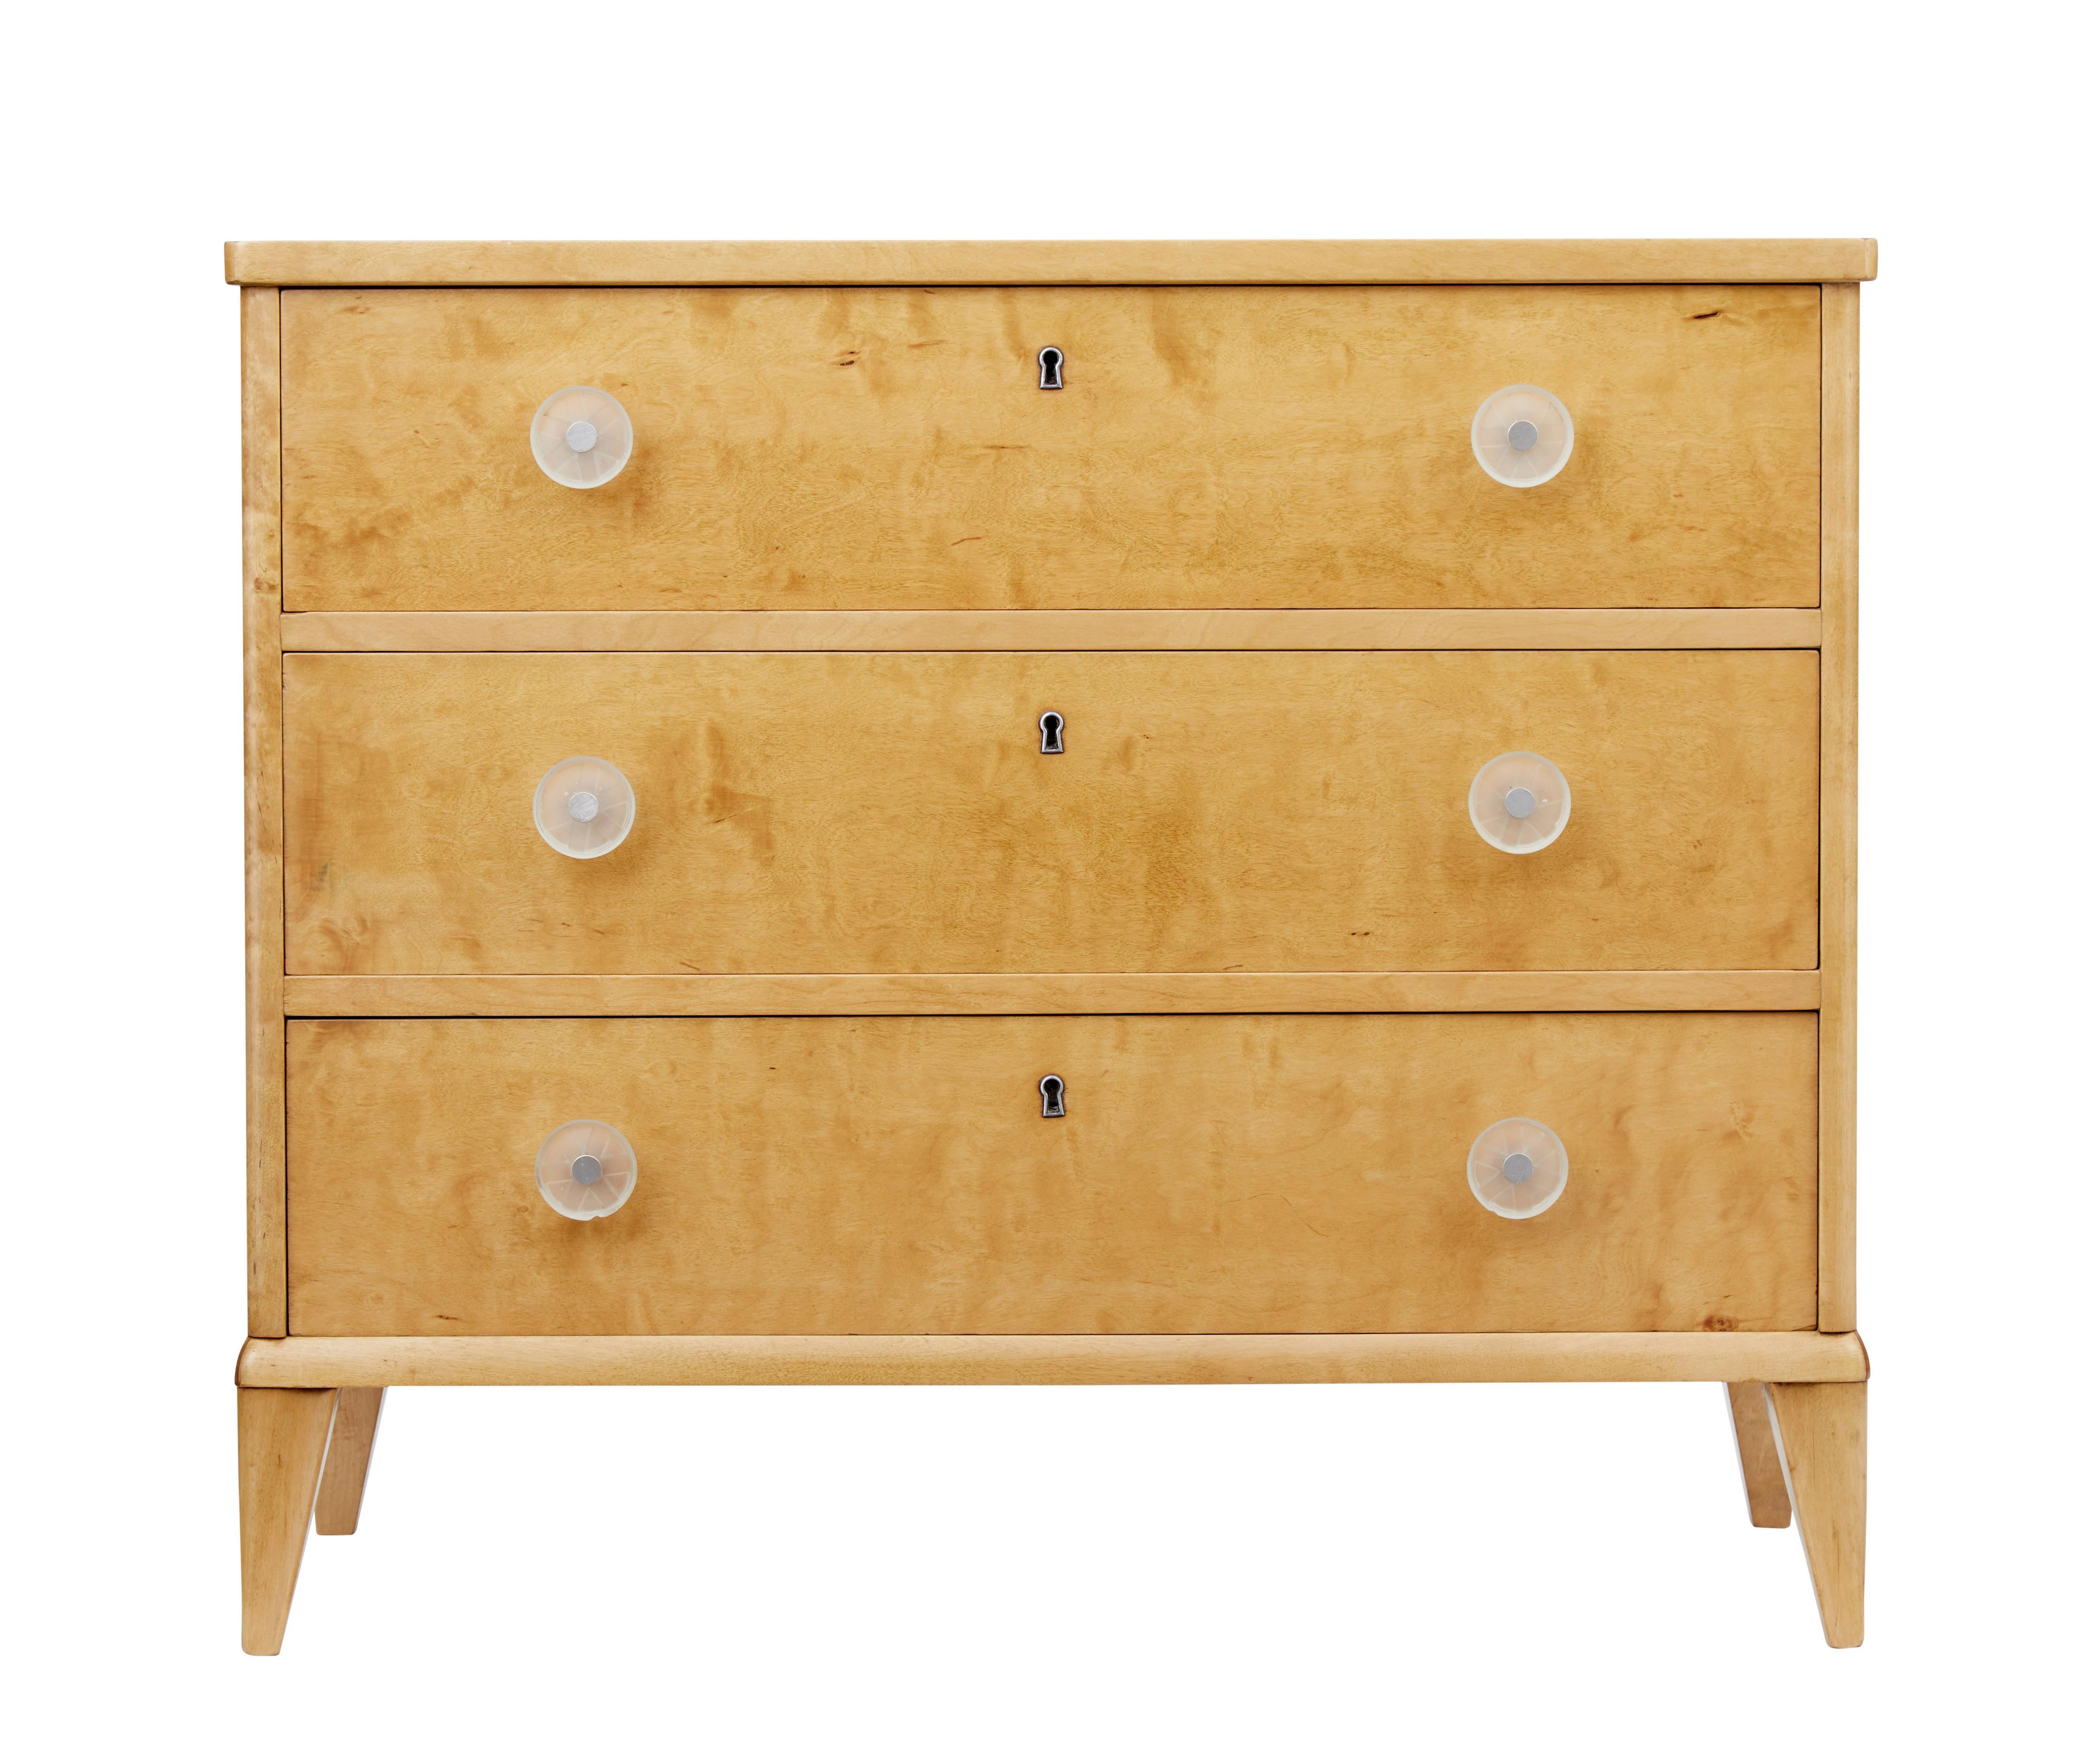 Simple but elegant Scandinavian birch chest of drawers, circa 1950.

3 drawers fitted with decorative etched plastic handles. Rich golden color, standing on tapered feet.

Recently re-polished in our workshop.

Minor surface marks and minor